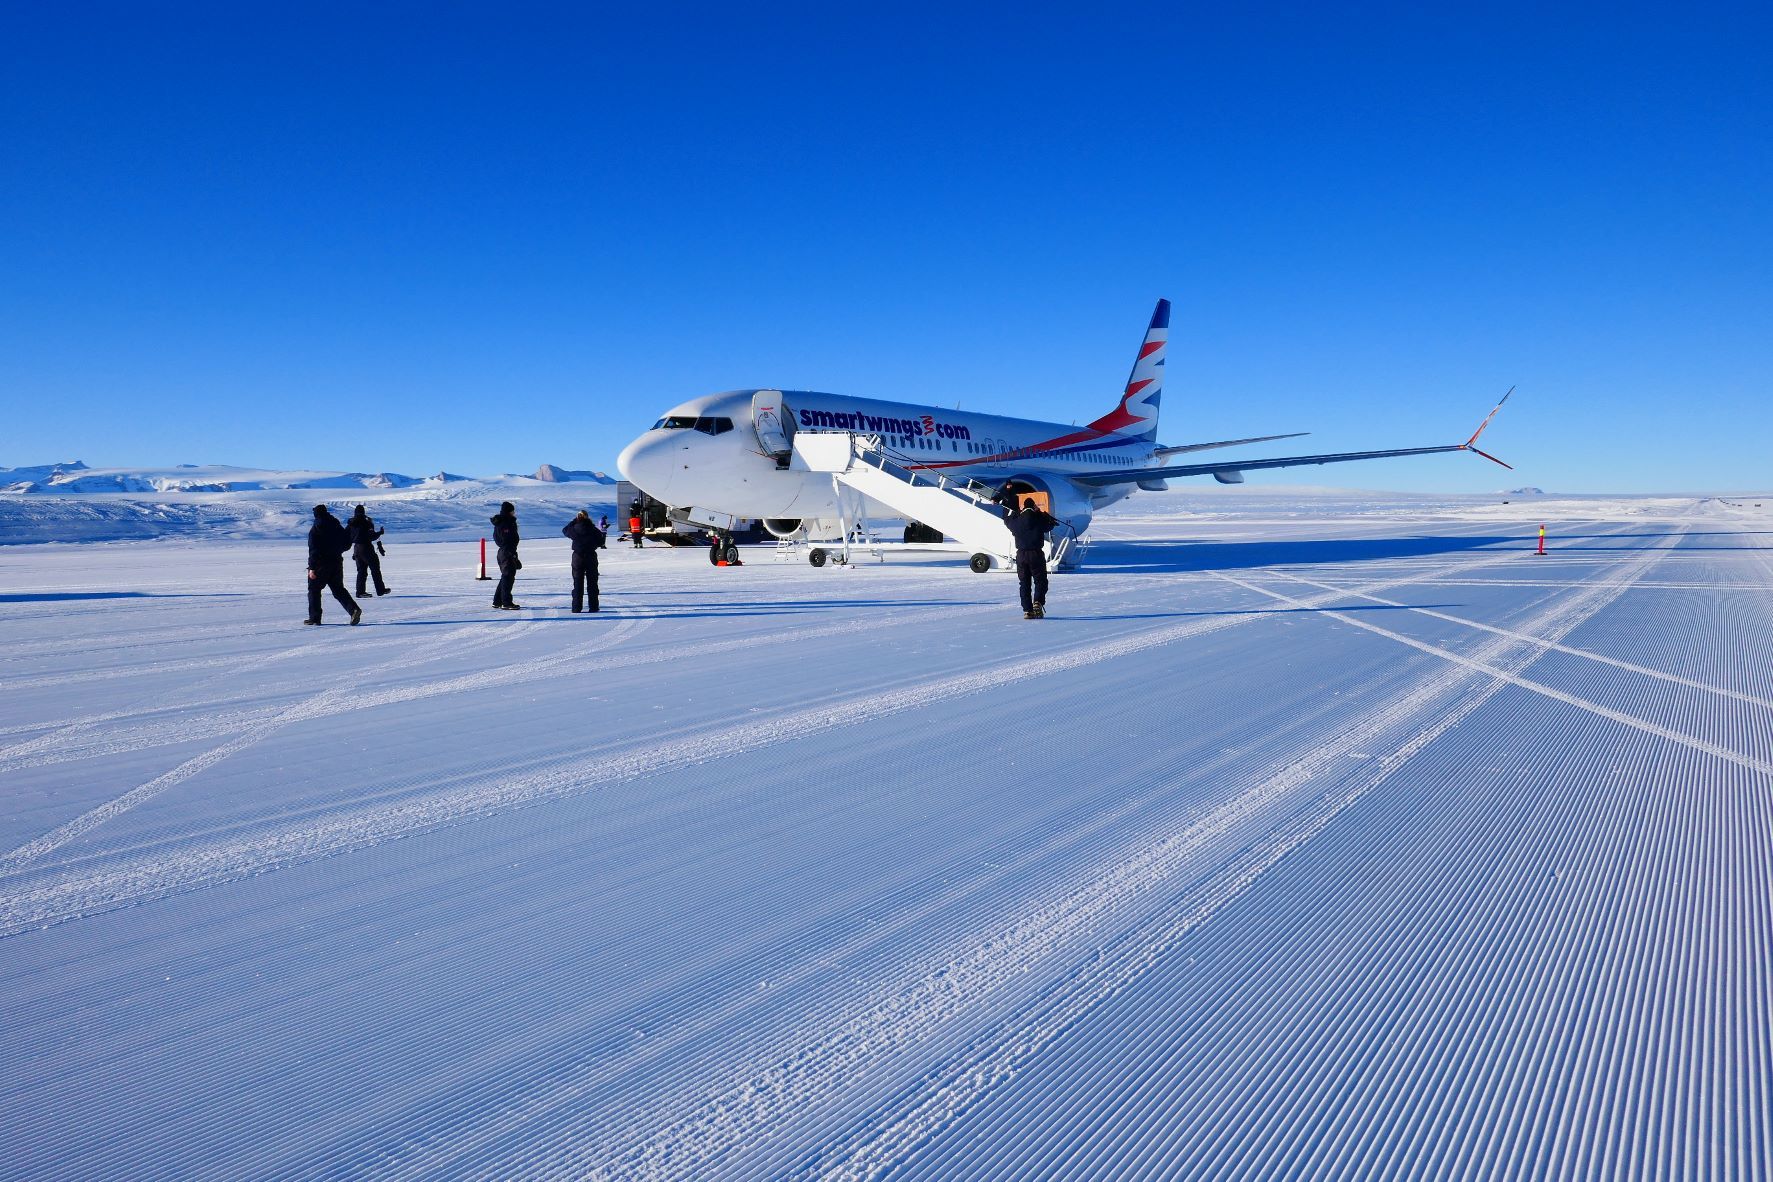 A Smartwings Boeing 737 MAX on the ground in Antarctica.